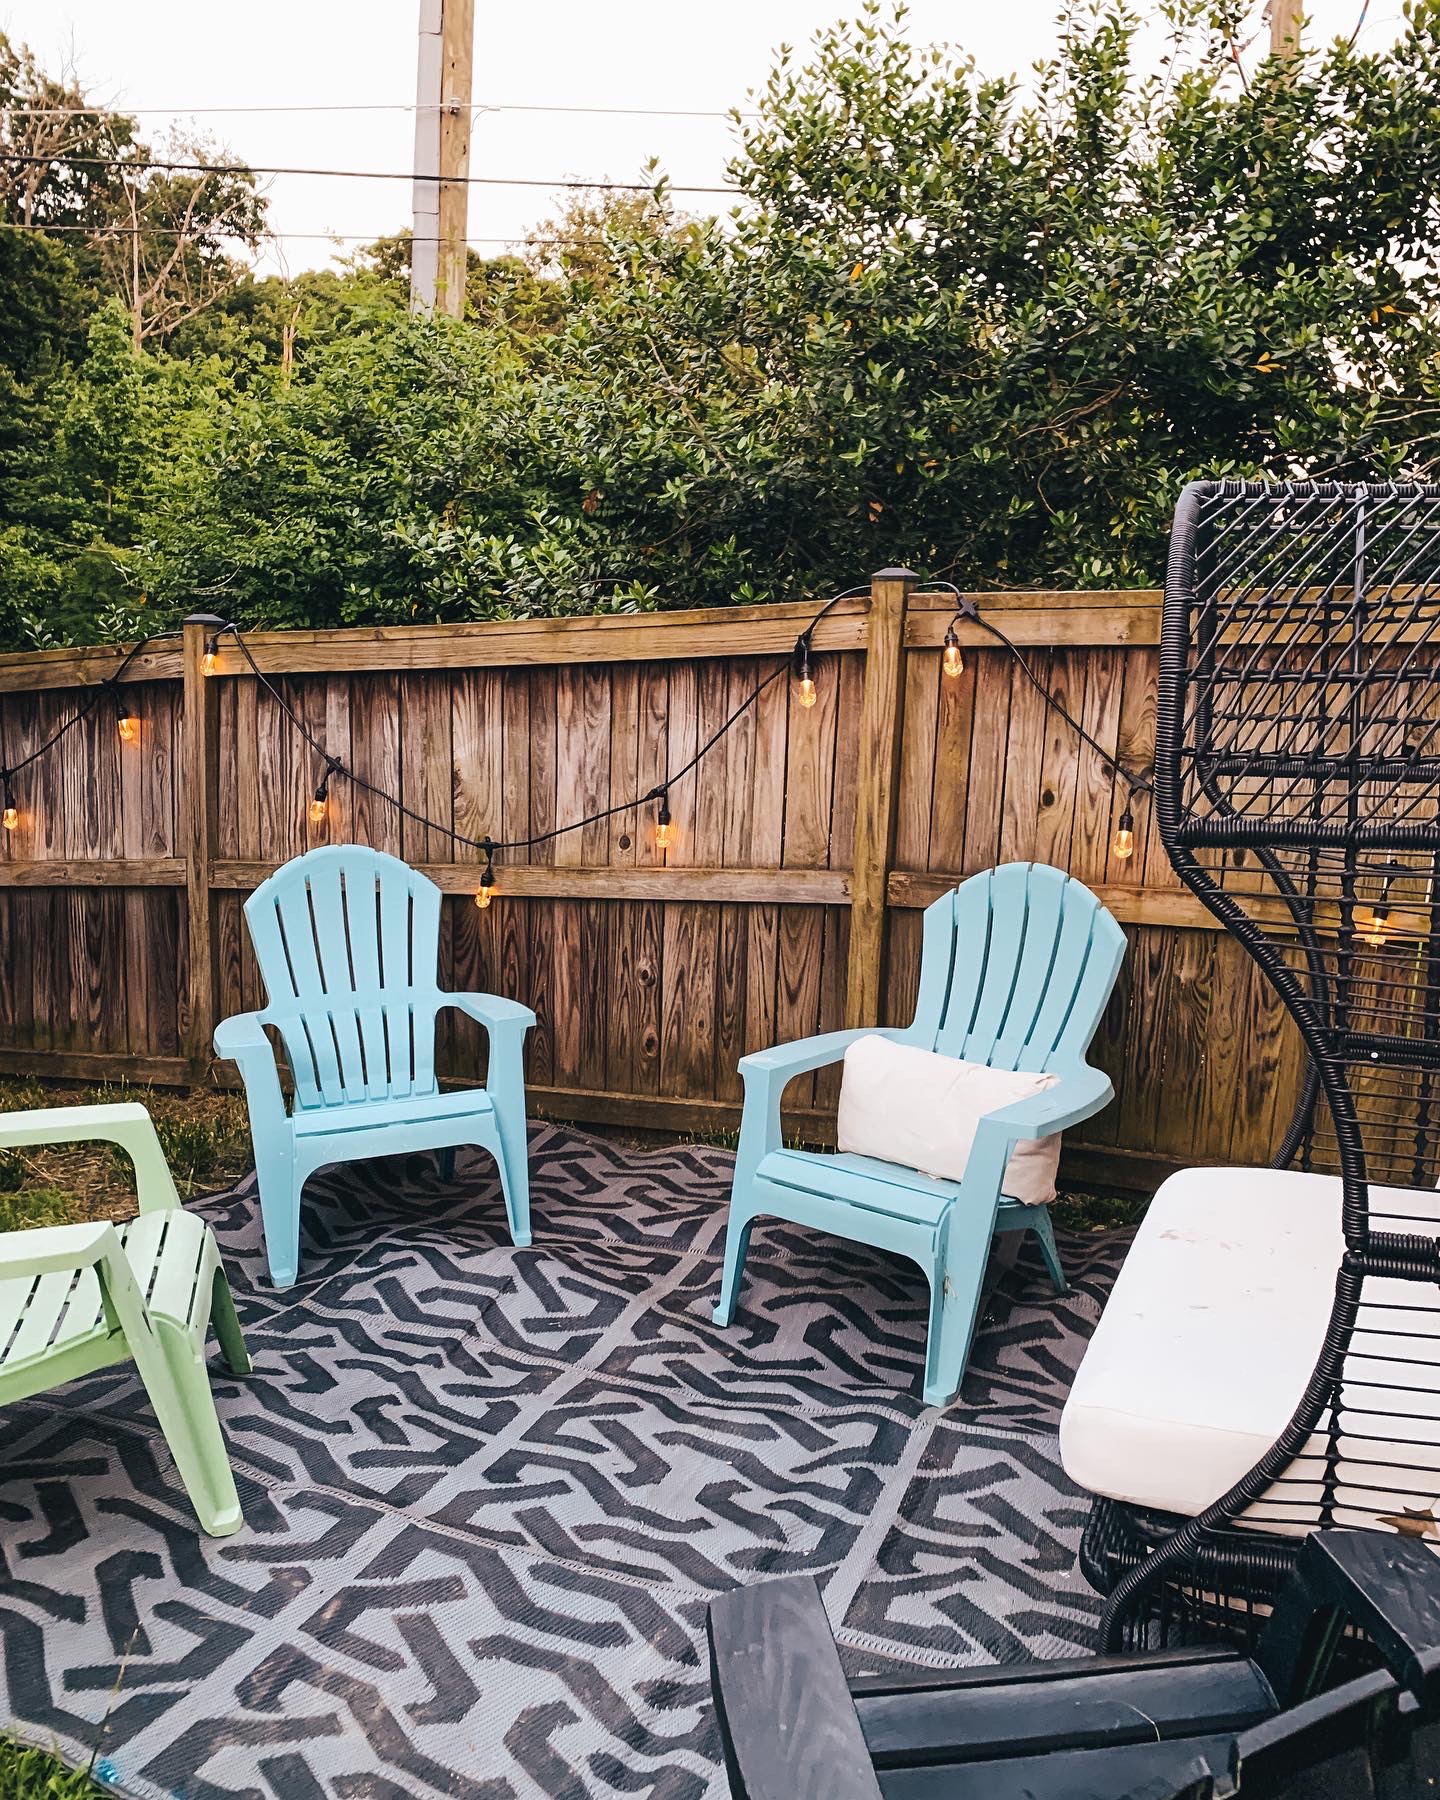 How to Decorate Your Backyard under $500